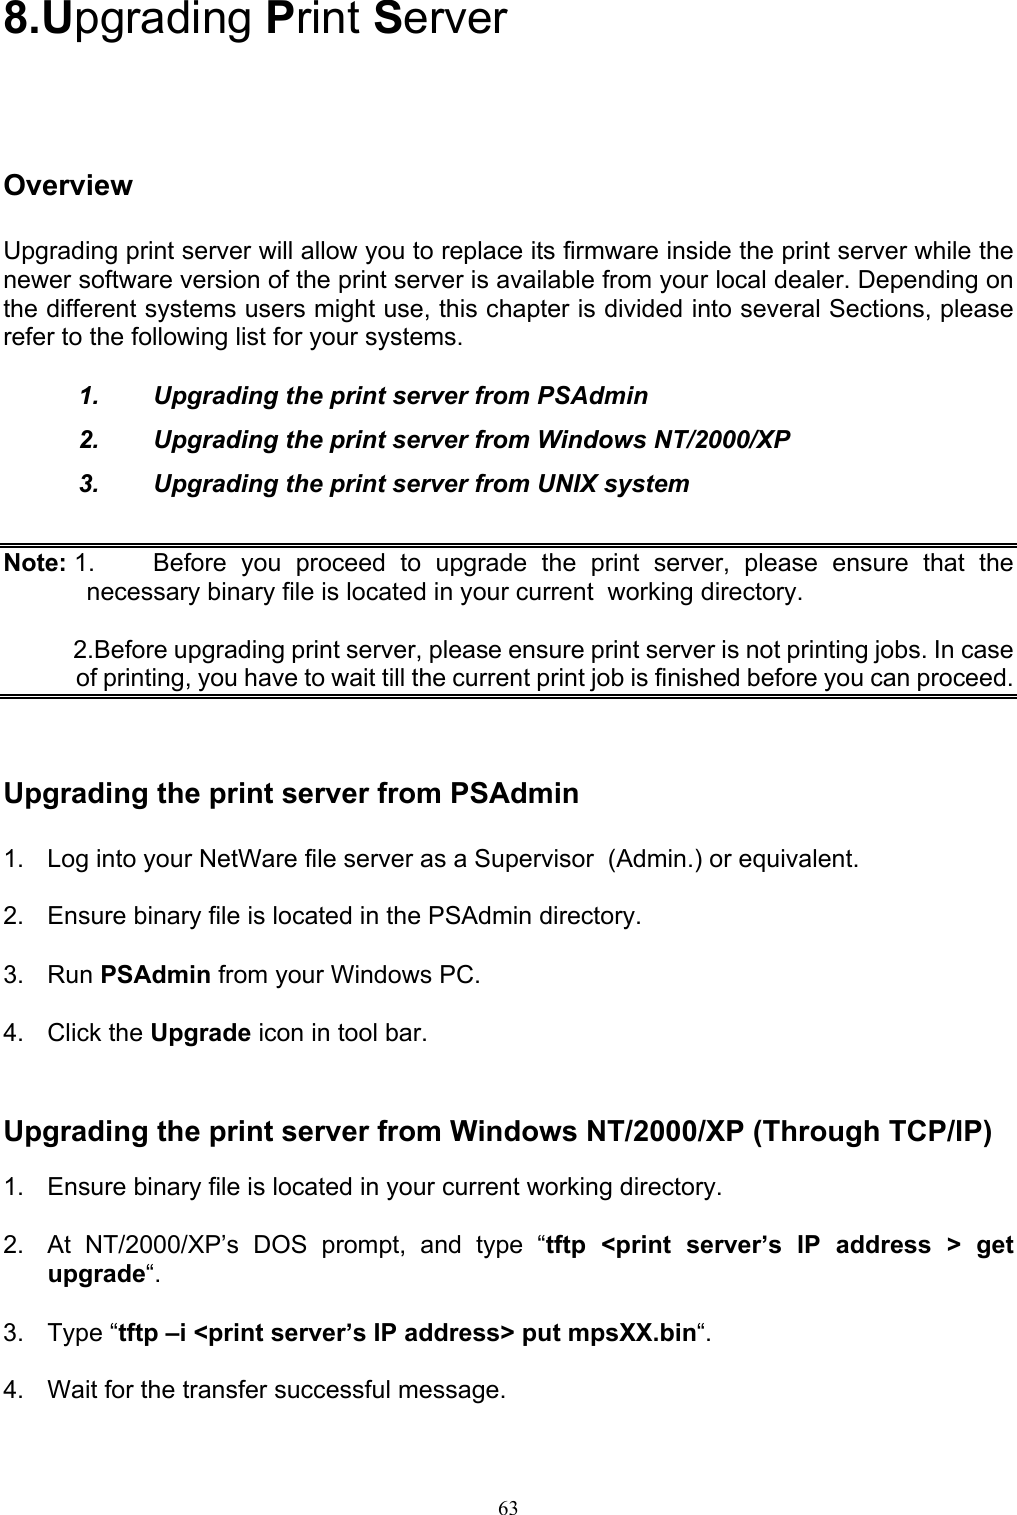                                                                                             63  8.Upgrading Print Server Overview Upgrading print server will allow you to replace its firmware inside the print server while the newer software version of the print server is available from your local dealer. Depending on the different systems users might use, this chapter is divided into several Sections, please refer to the following list for your systems.  1.  Upgrading the print server from PSAdmin 2.  Upgrading the print server from Windows NT/2000/XP 3.  Upgrading the print server from UNIX system  Note: 1.  Before you proceed to upgrade the print server, please ensure that the necessary binary file is located in your current  working directory.            2.Before upgrading print server, please ensure print server is not printing jobs. In case of printing, you have to wait till the current print job is finished before you can proceed.     Upgrading the print server from PSAdmin 1.  Log into your NetWare file server as a Supervisor  (Admin.) or equivalent.  2.  Ensure binary file is located in the PSAdmin directory.  3. Run PSAdmin from your Windows PC.  4. Click the Upgrade icon in tool bar.   Upgrading the print server from Windows NT/2000/XP (Through TCP/IP)  1.  Ensure binary file is located in your current working directory.  2.  At NT/2000/XP’s DOS prompt, and type “tftp &lt;print server’s IP address &gt; get upgrade“.  3. Type “tftp –i &lt;print server’s IP address&gt; put mpsXX.bin“.  4.  Wait for the transfer successful message.  